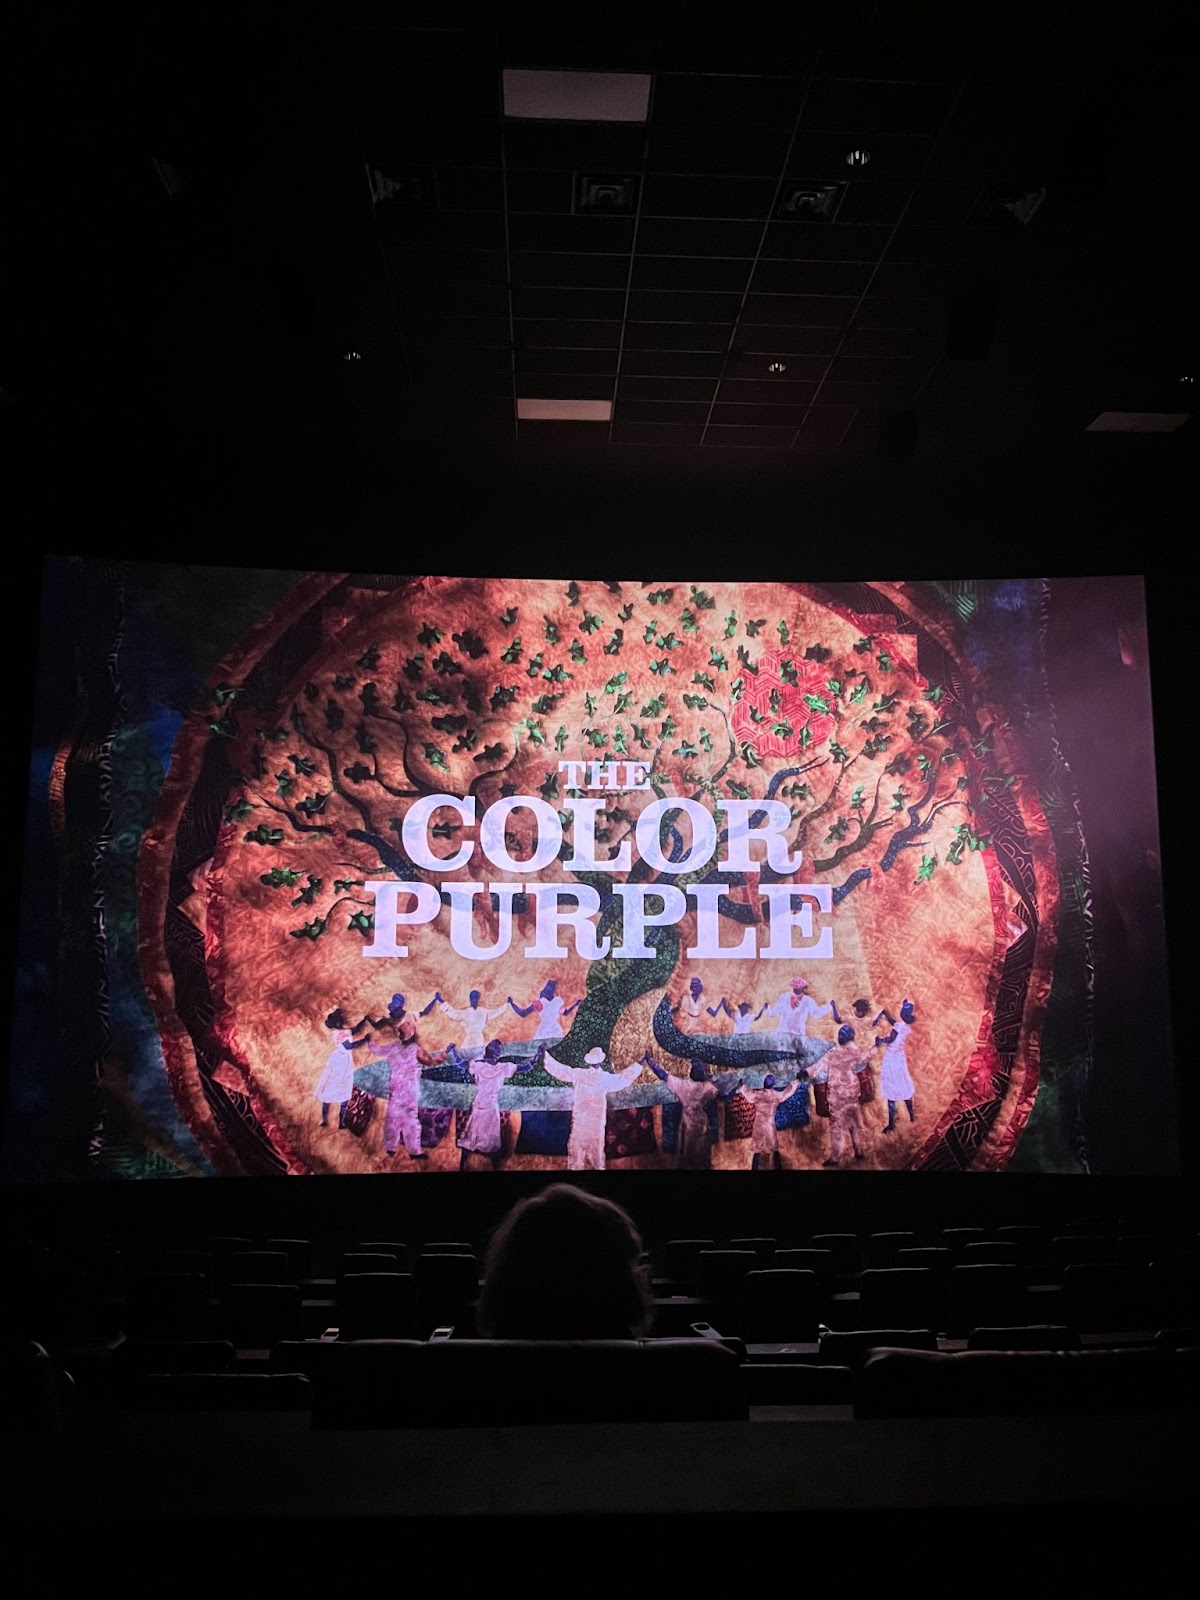 The Sound of Cinema: Song drives character growth in 'The Color Purple' (2023)